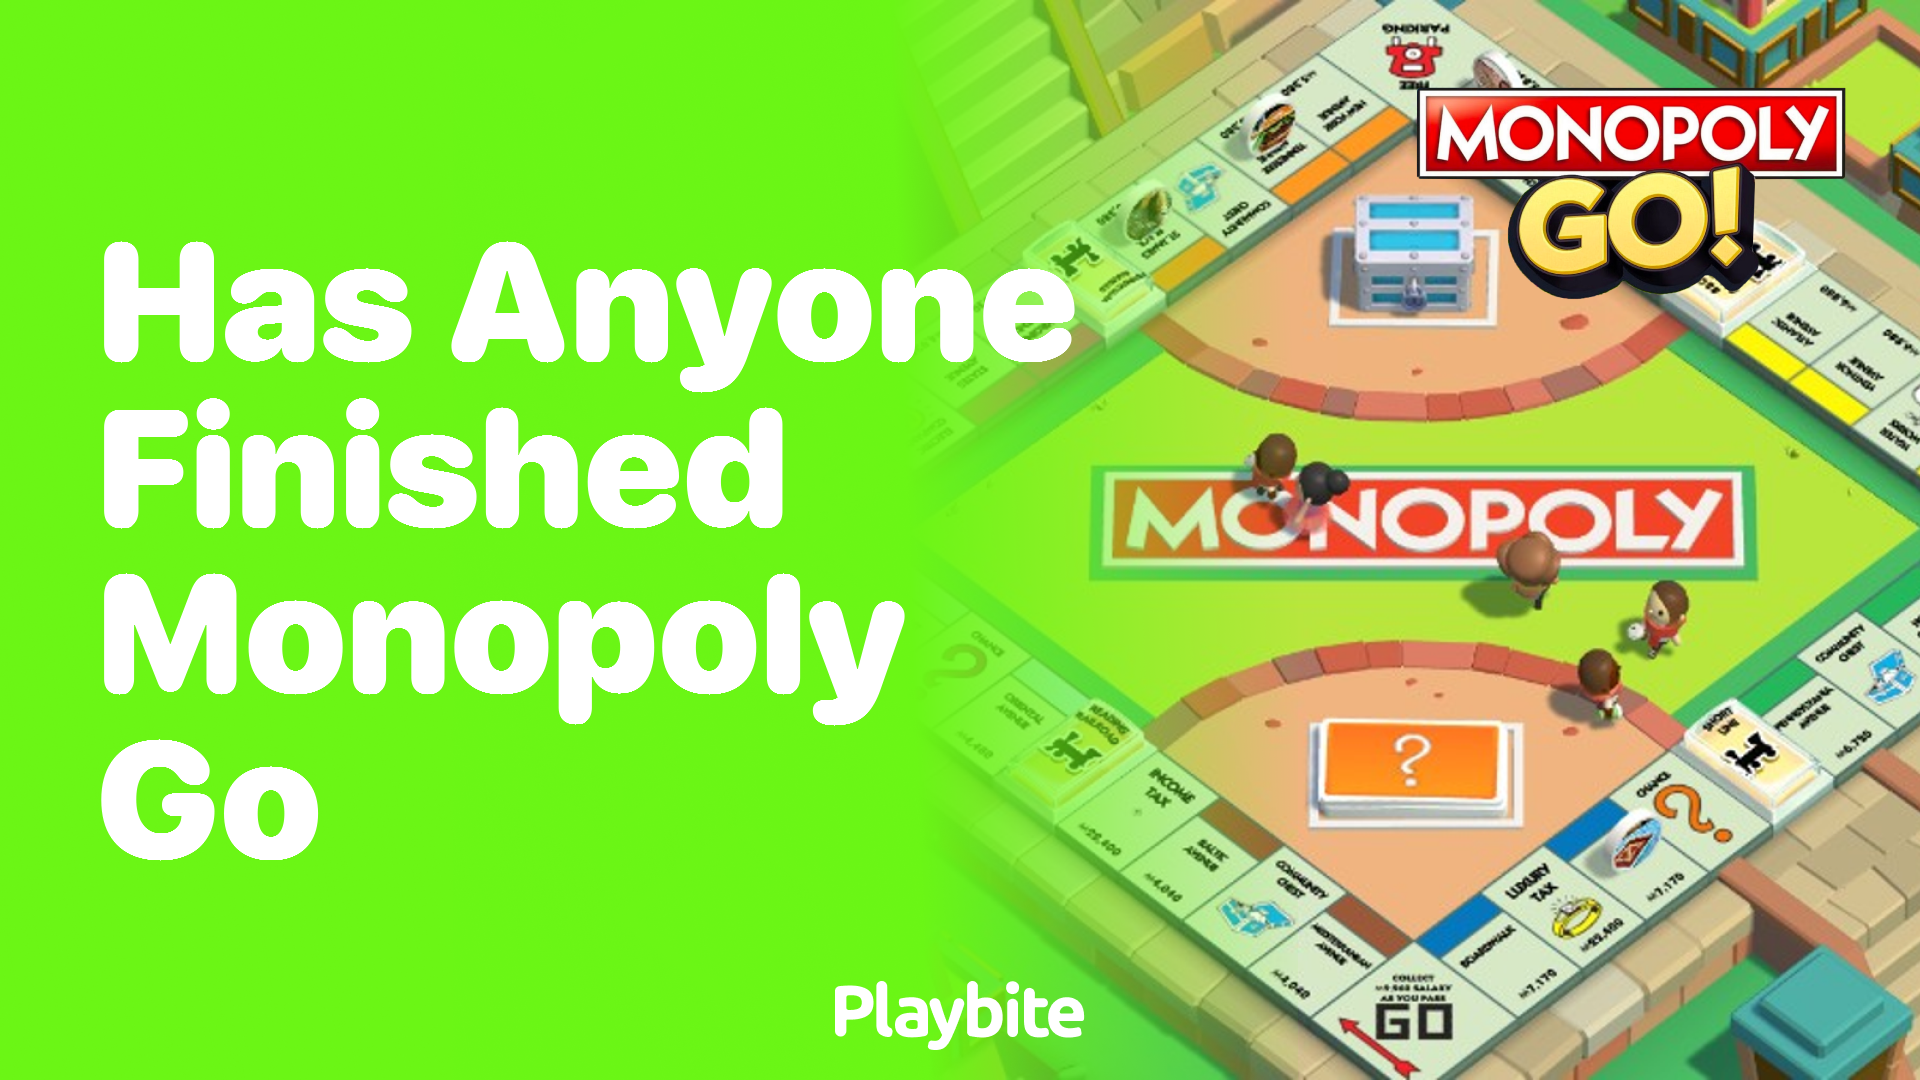 Has Anyone Finished Monopoly Go?